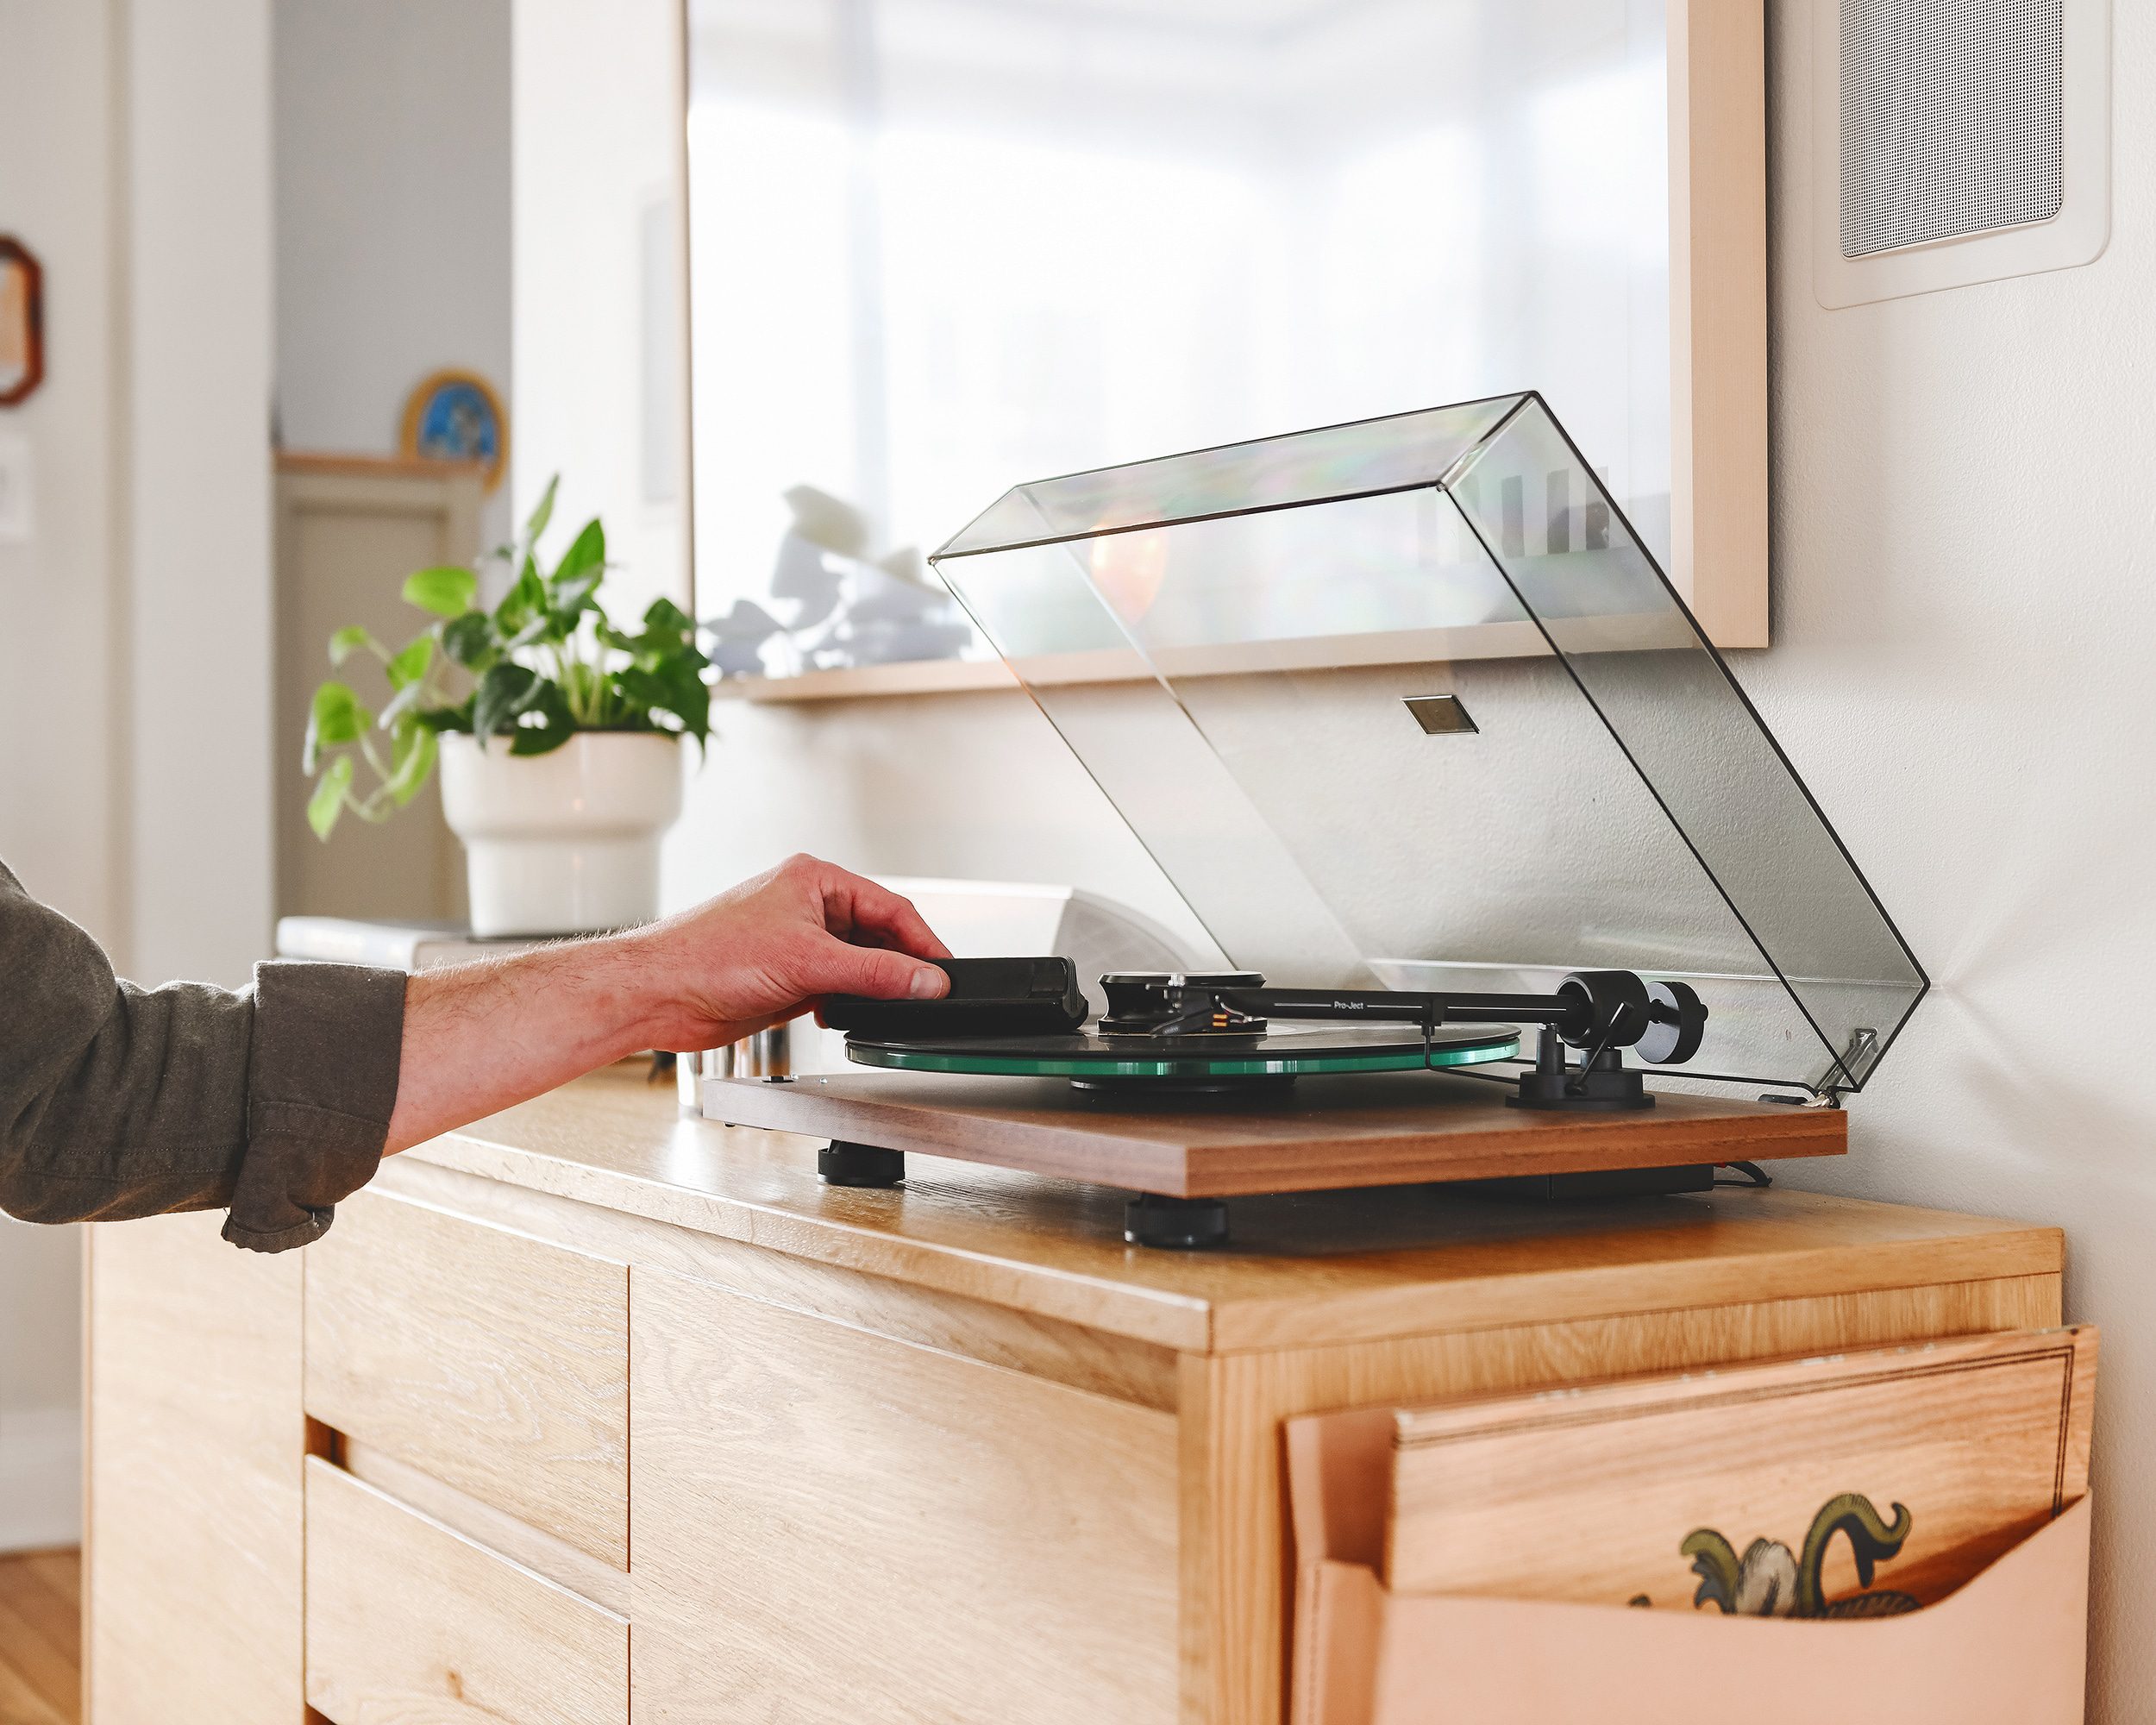 Scott cleans a record prior to dropping the needle on Arcade Fire's classic album, Funeral // via Yellow Brick Home